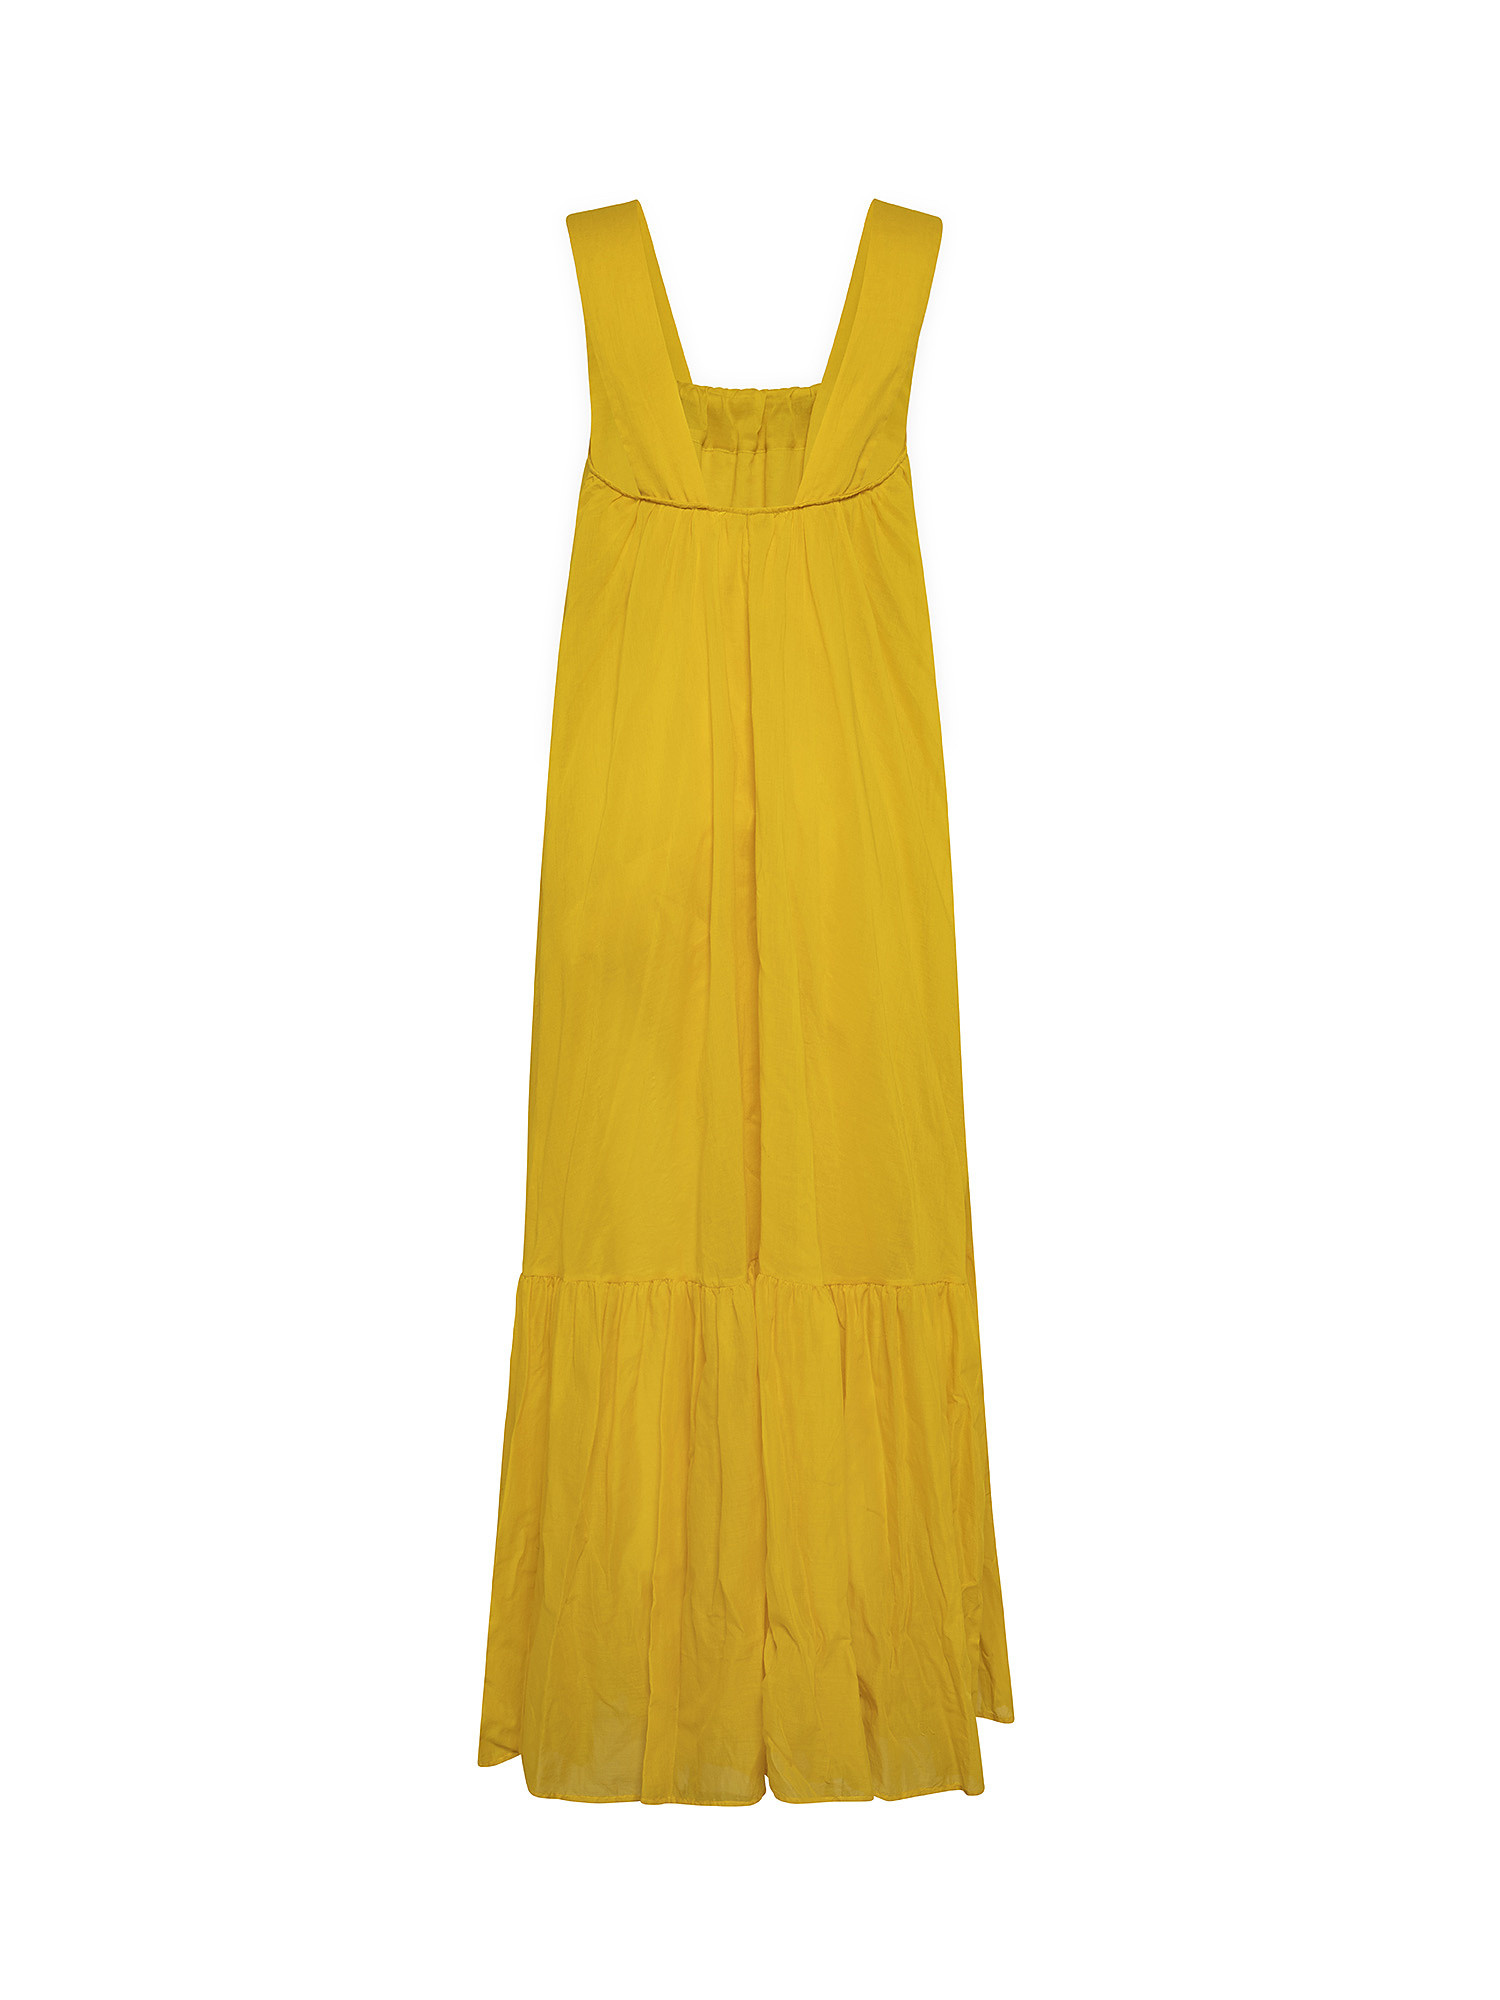 Lexington dress in cotton voile, Yellow, large image number 1